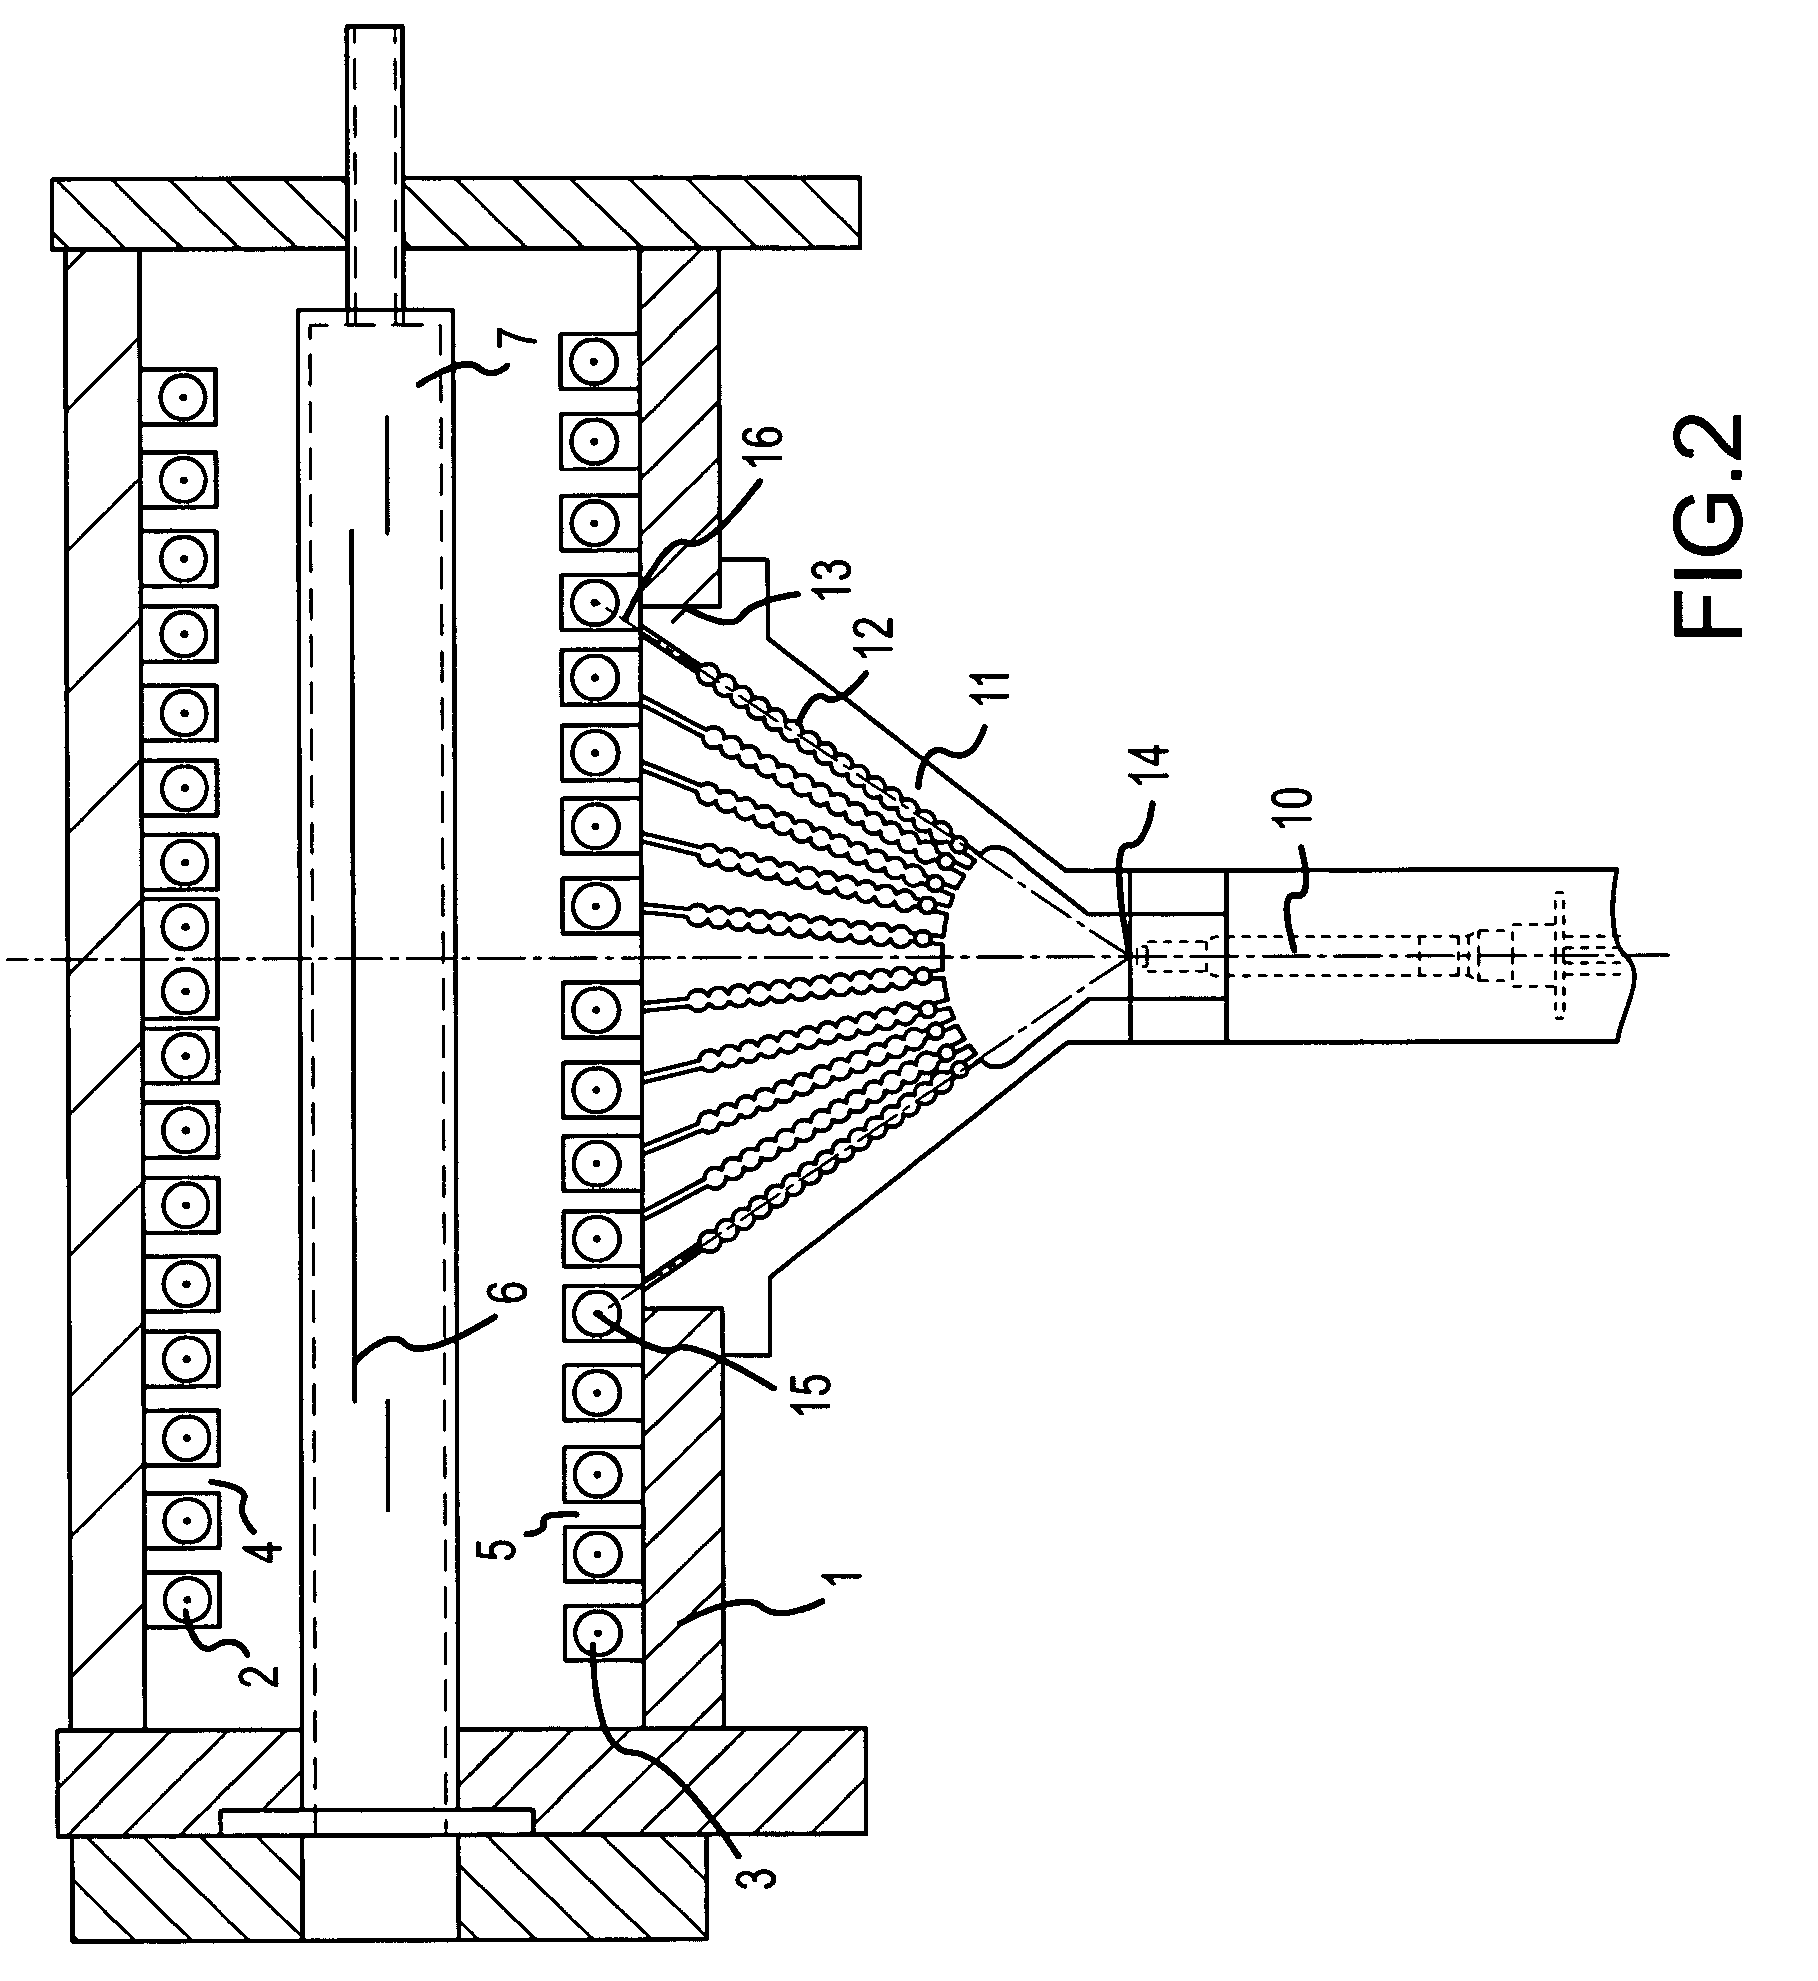 Apparatus and method for measuring the temperature of substrates